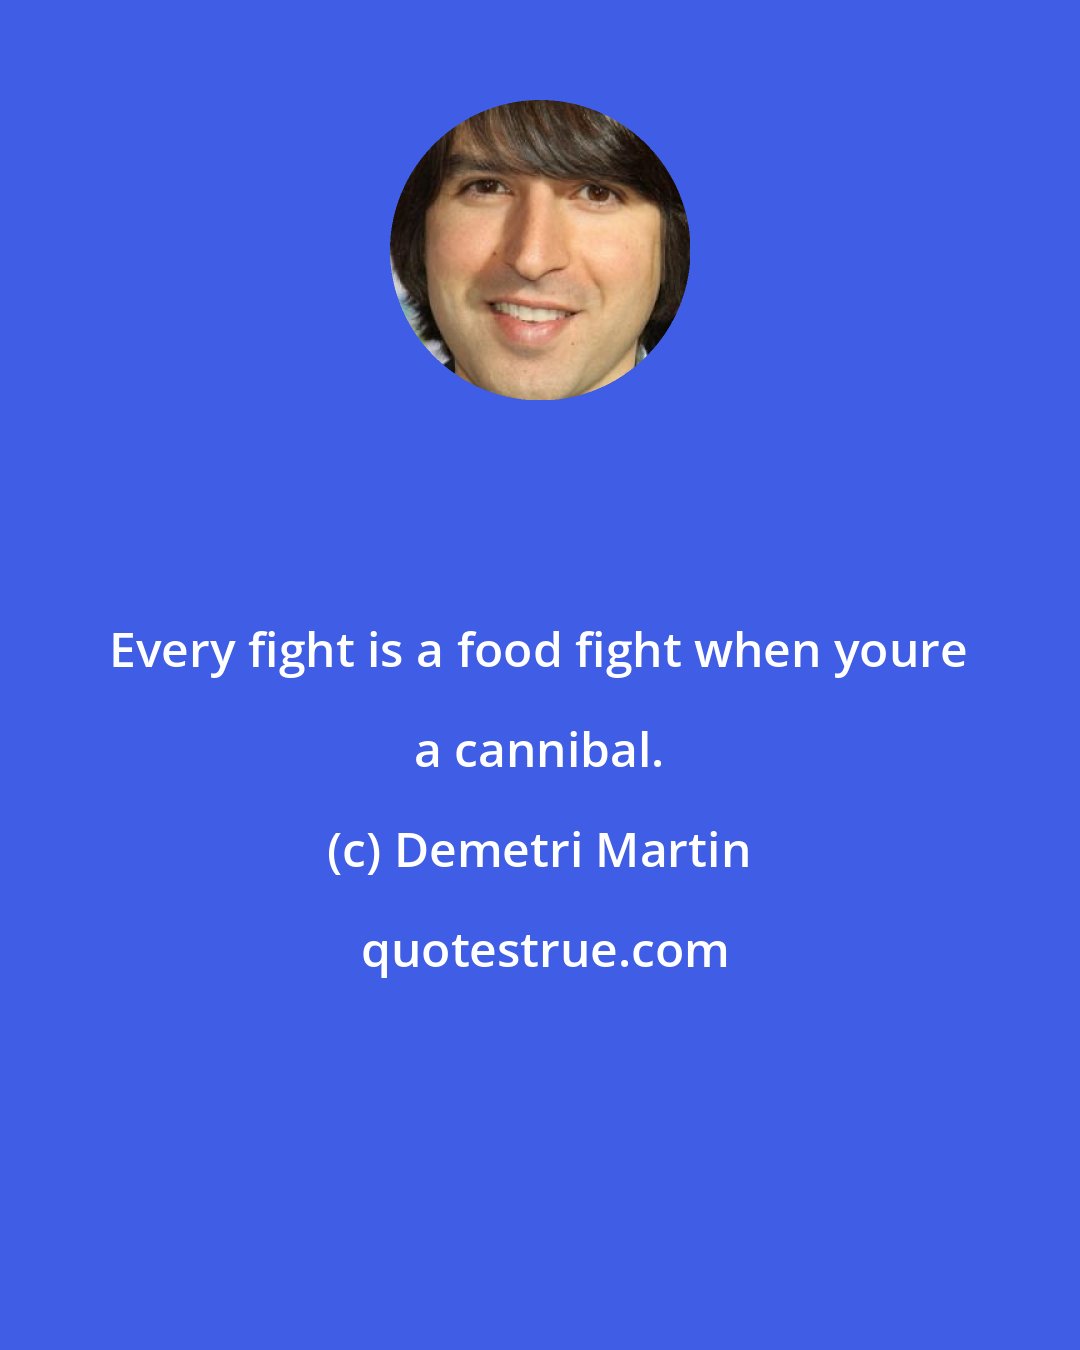 Demetri Martin: Every fight is a food fight when youre a cannibal.